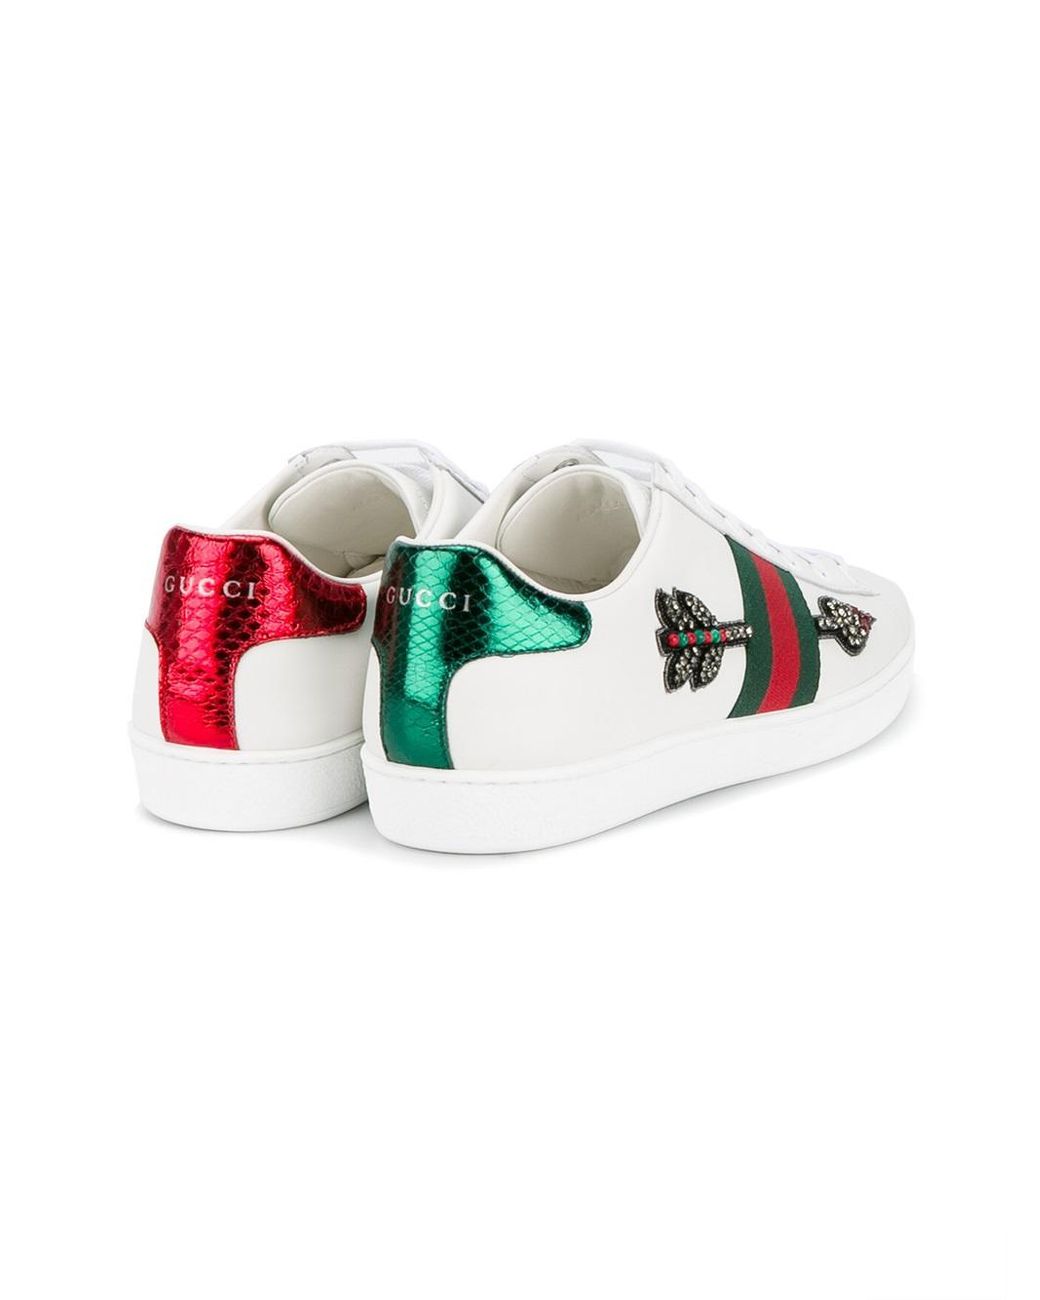 Gucci Ace Sneakers With Lateral Band And Embroidered Arrow | Lyst